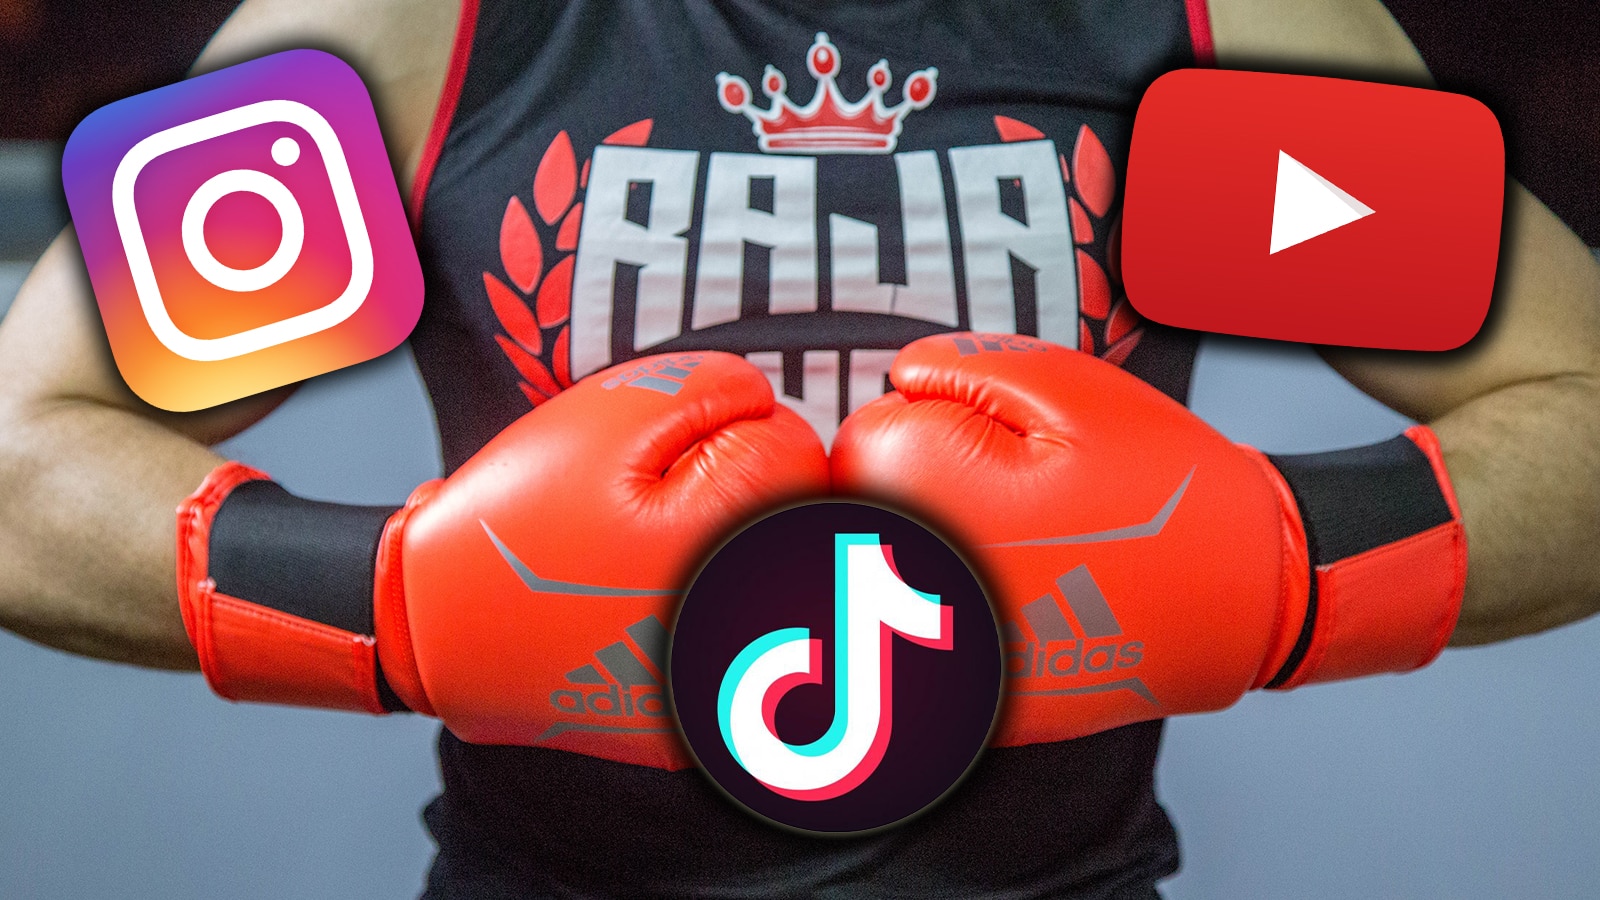 New influencer boxing show coming to TV with $1 million prize